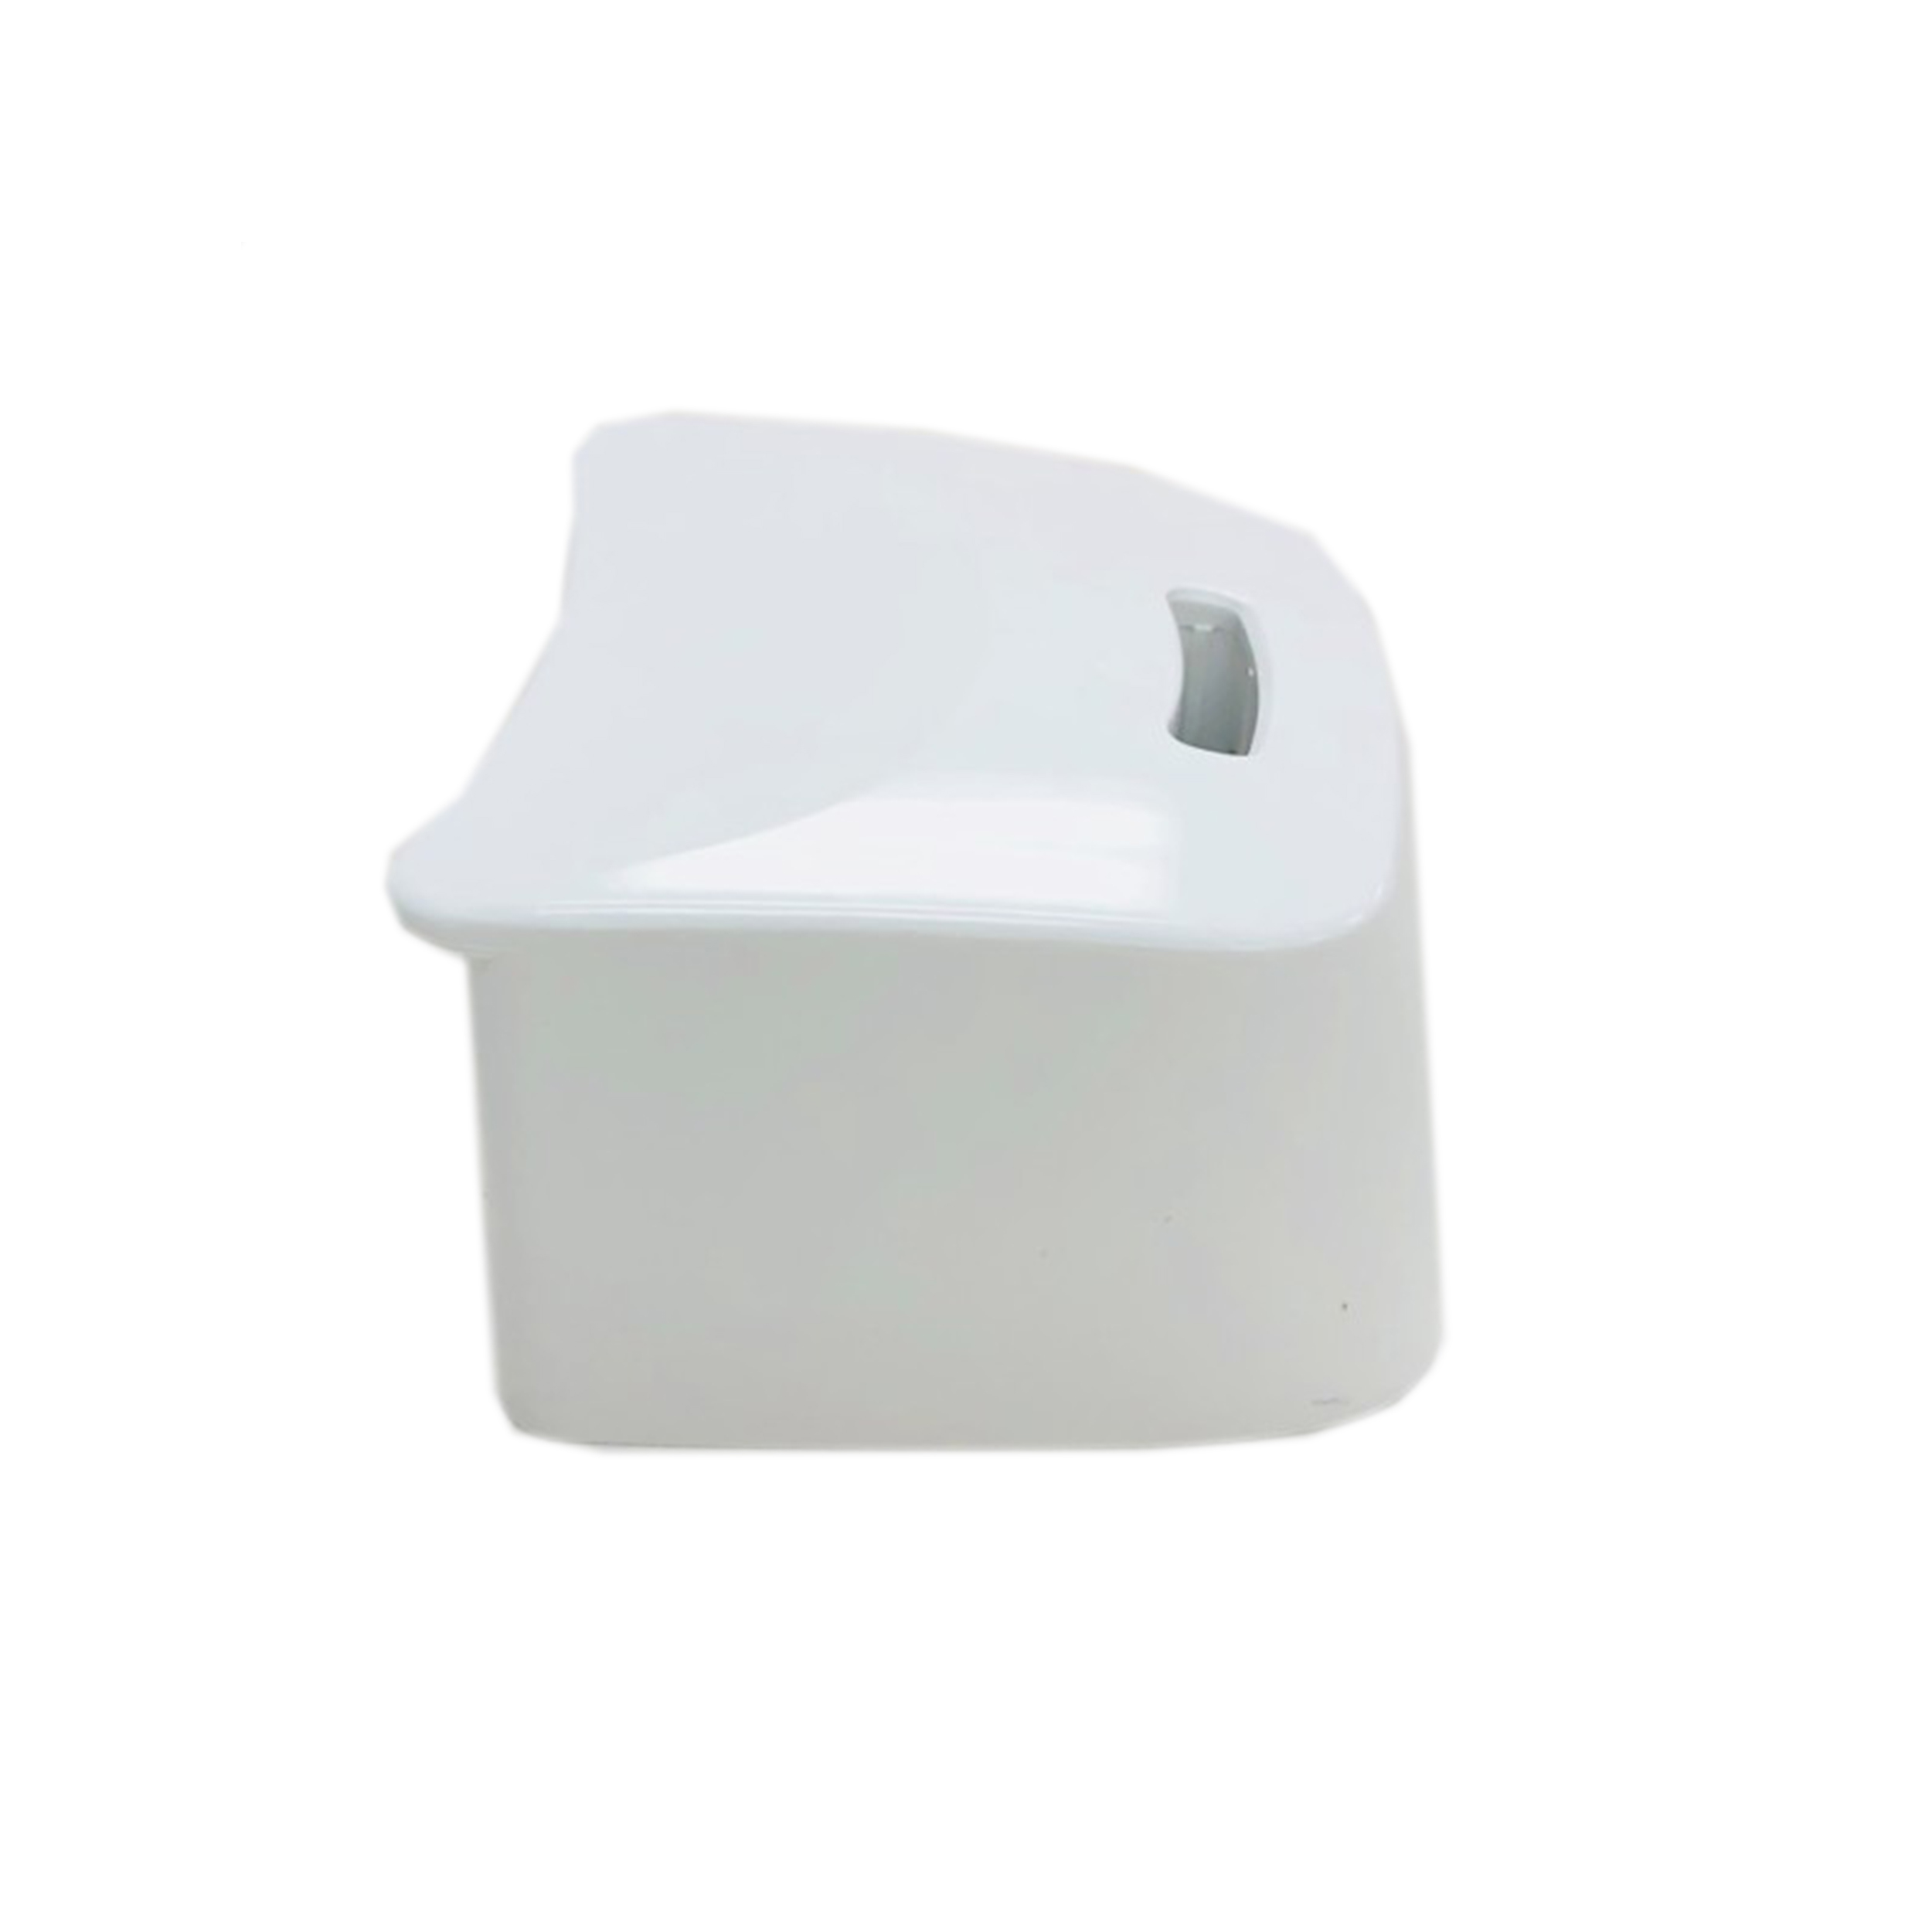 Standard Chinrest (High) (M0401441_COVER-ACCESSORIES CHIN BLOCK-HIGH/ABS/M0041658 Smart Plus(CBCT))